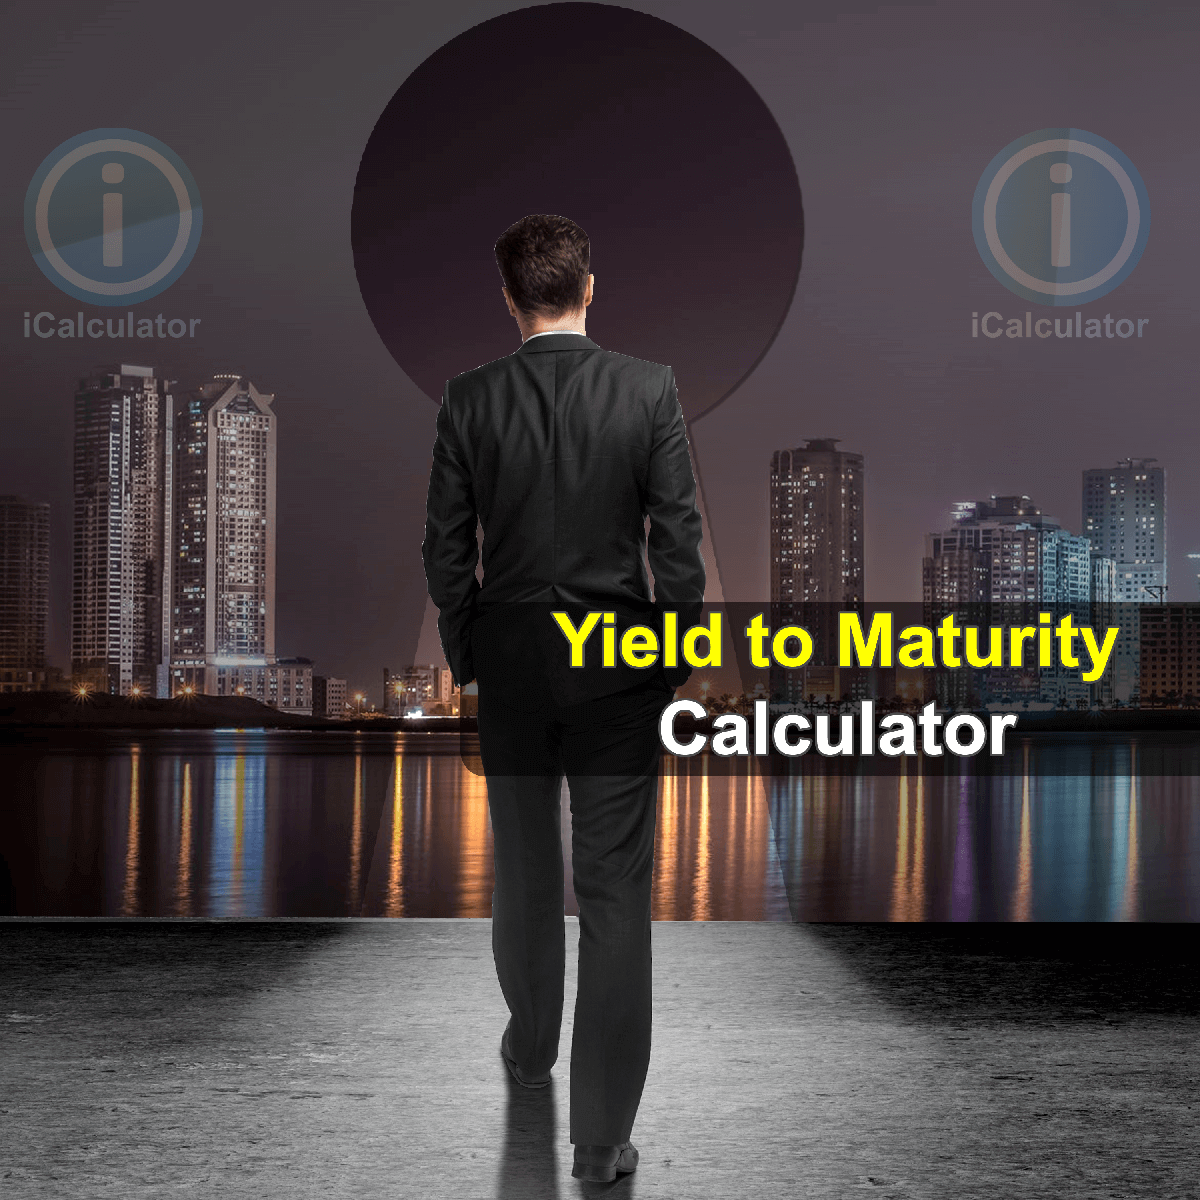 Yield to Maturity Calculator. This image provides details of how to calculate Yield to Maturity using a calculator and notepad. By using the Yield to Maturity formula, the Yield to Maturity Calculator provides a true calculation of the rate of return on long term or a fixed rate security investments